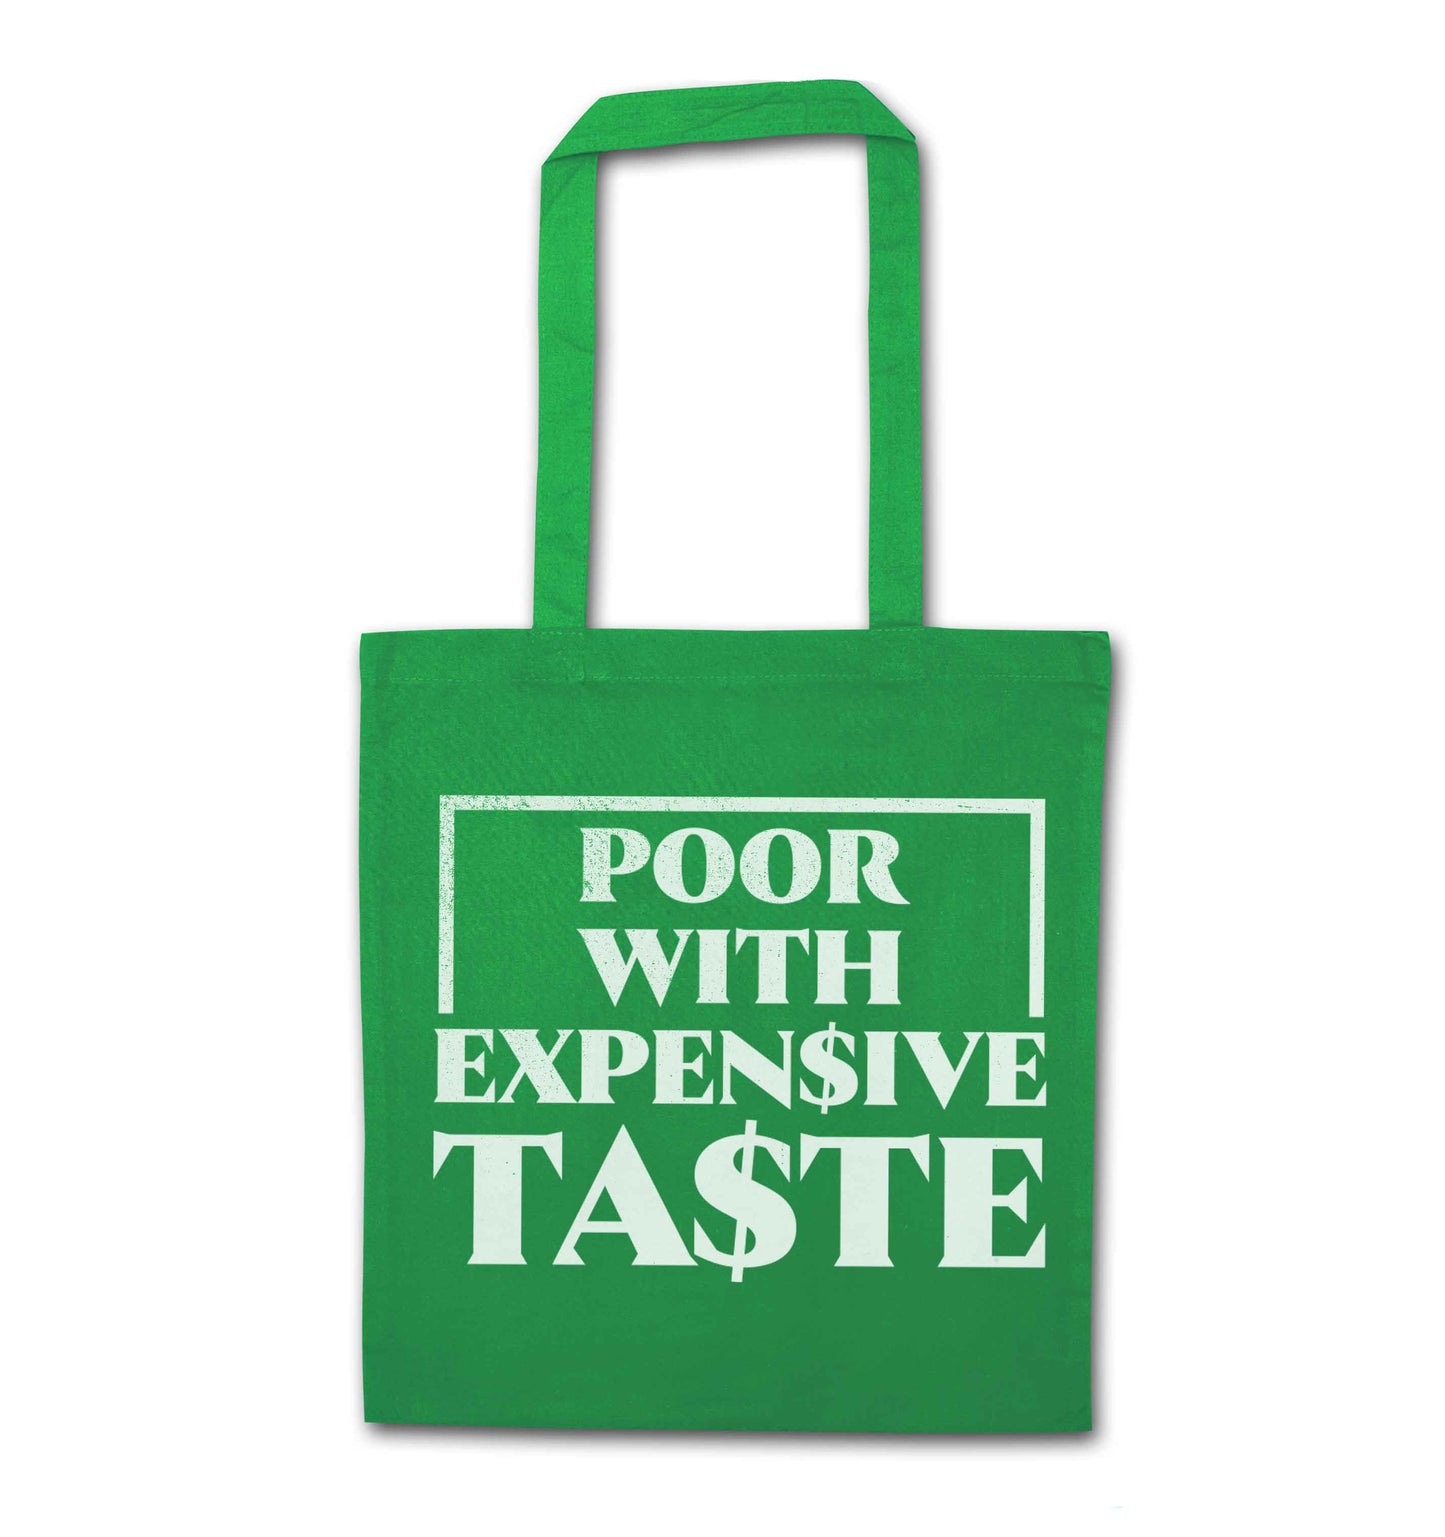 Poor with expensive taste green tote bag